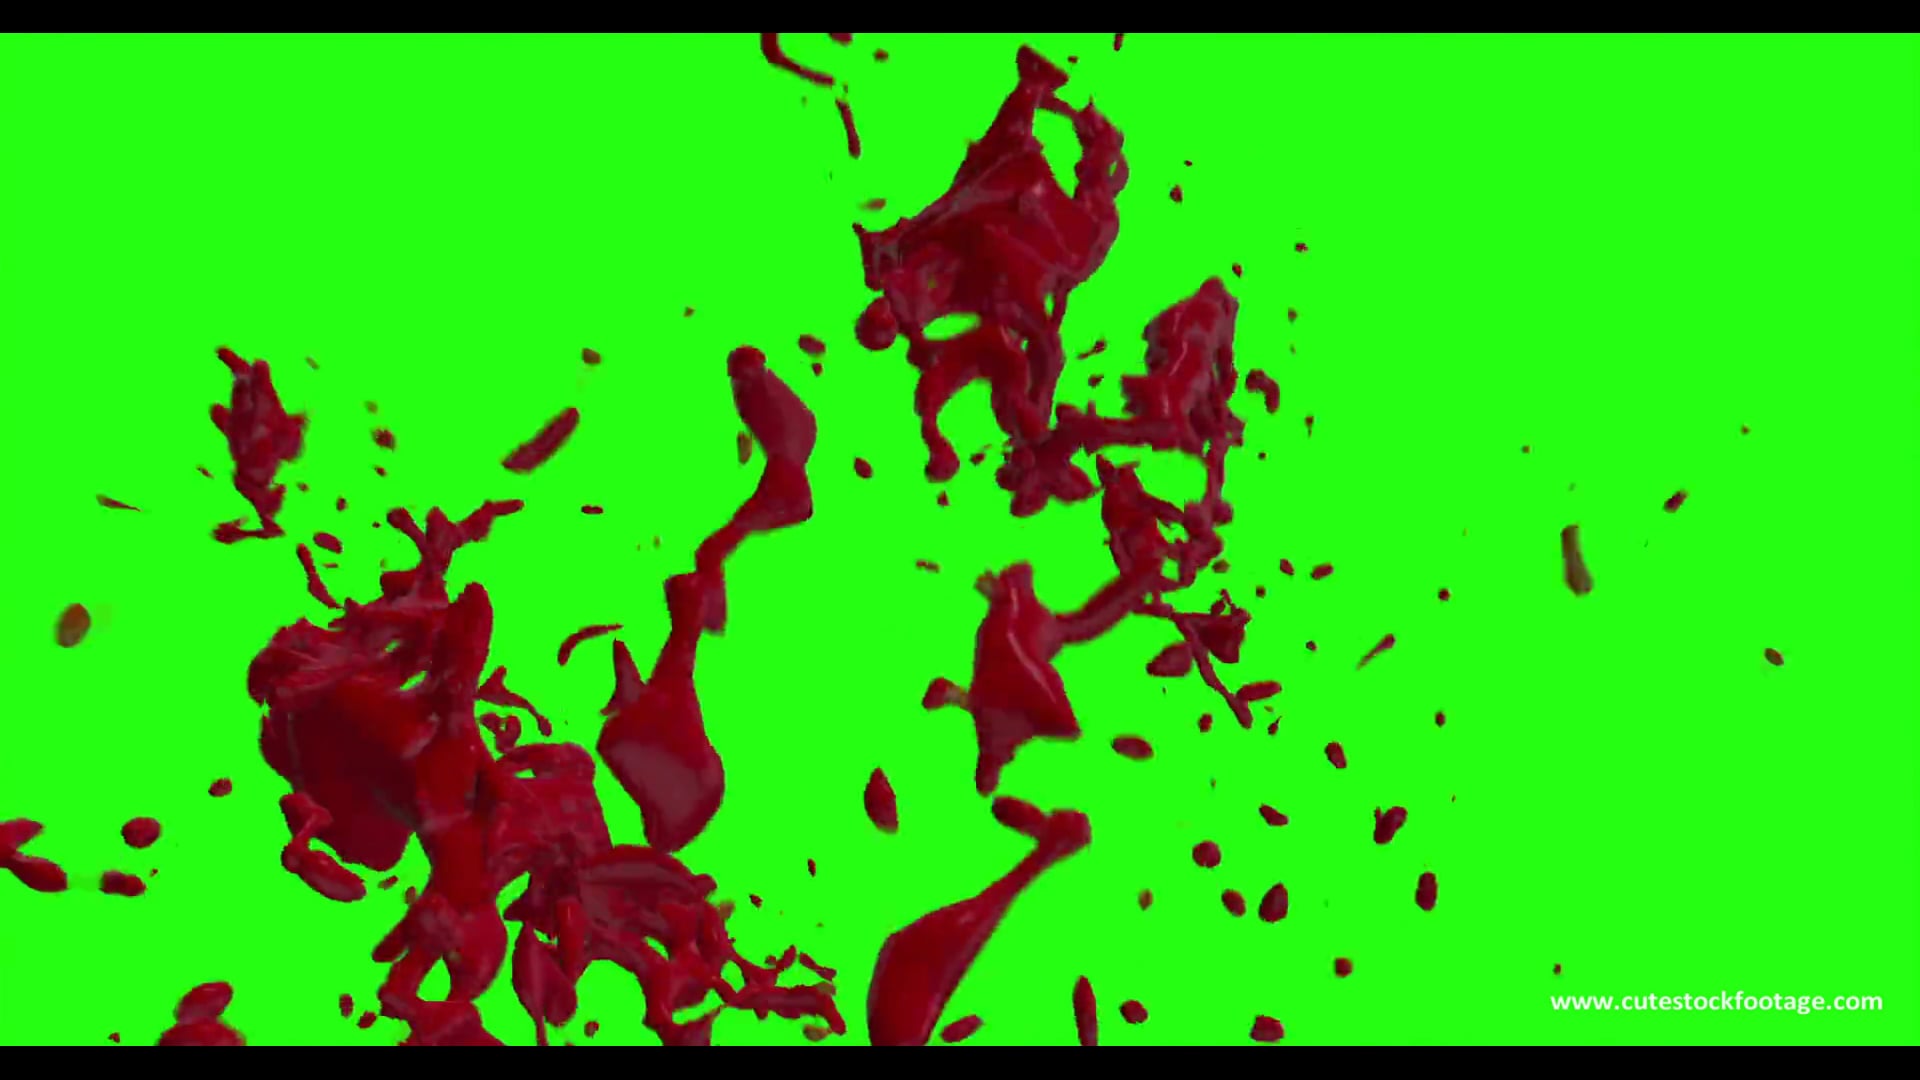 blood burst after effects free download